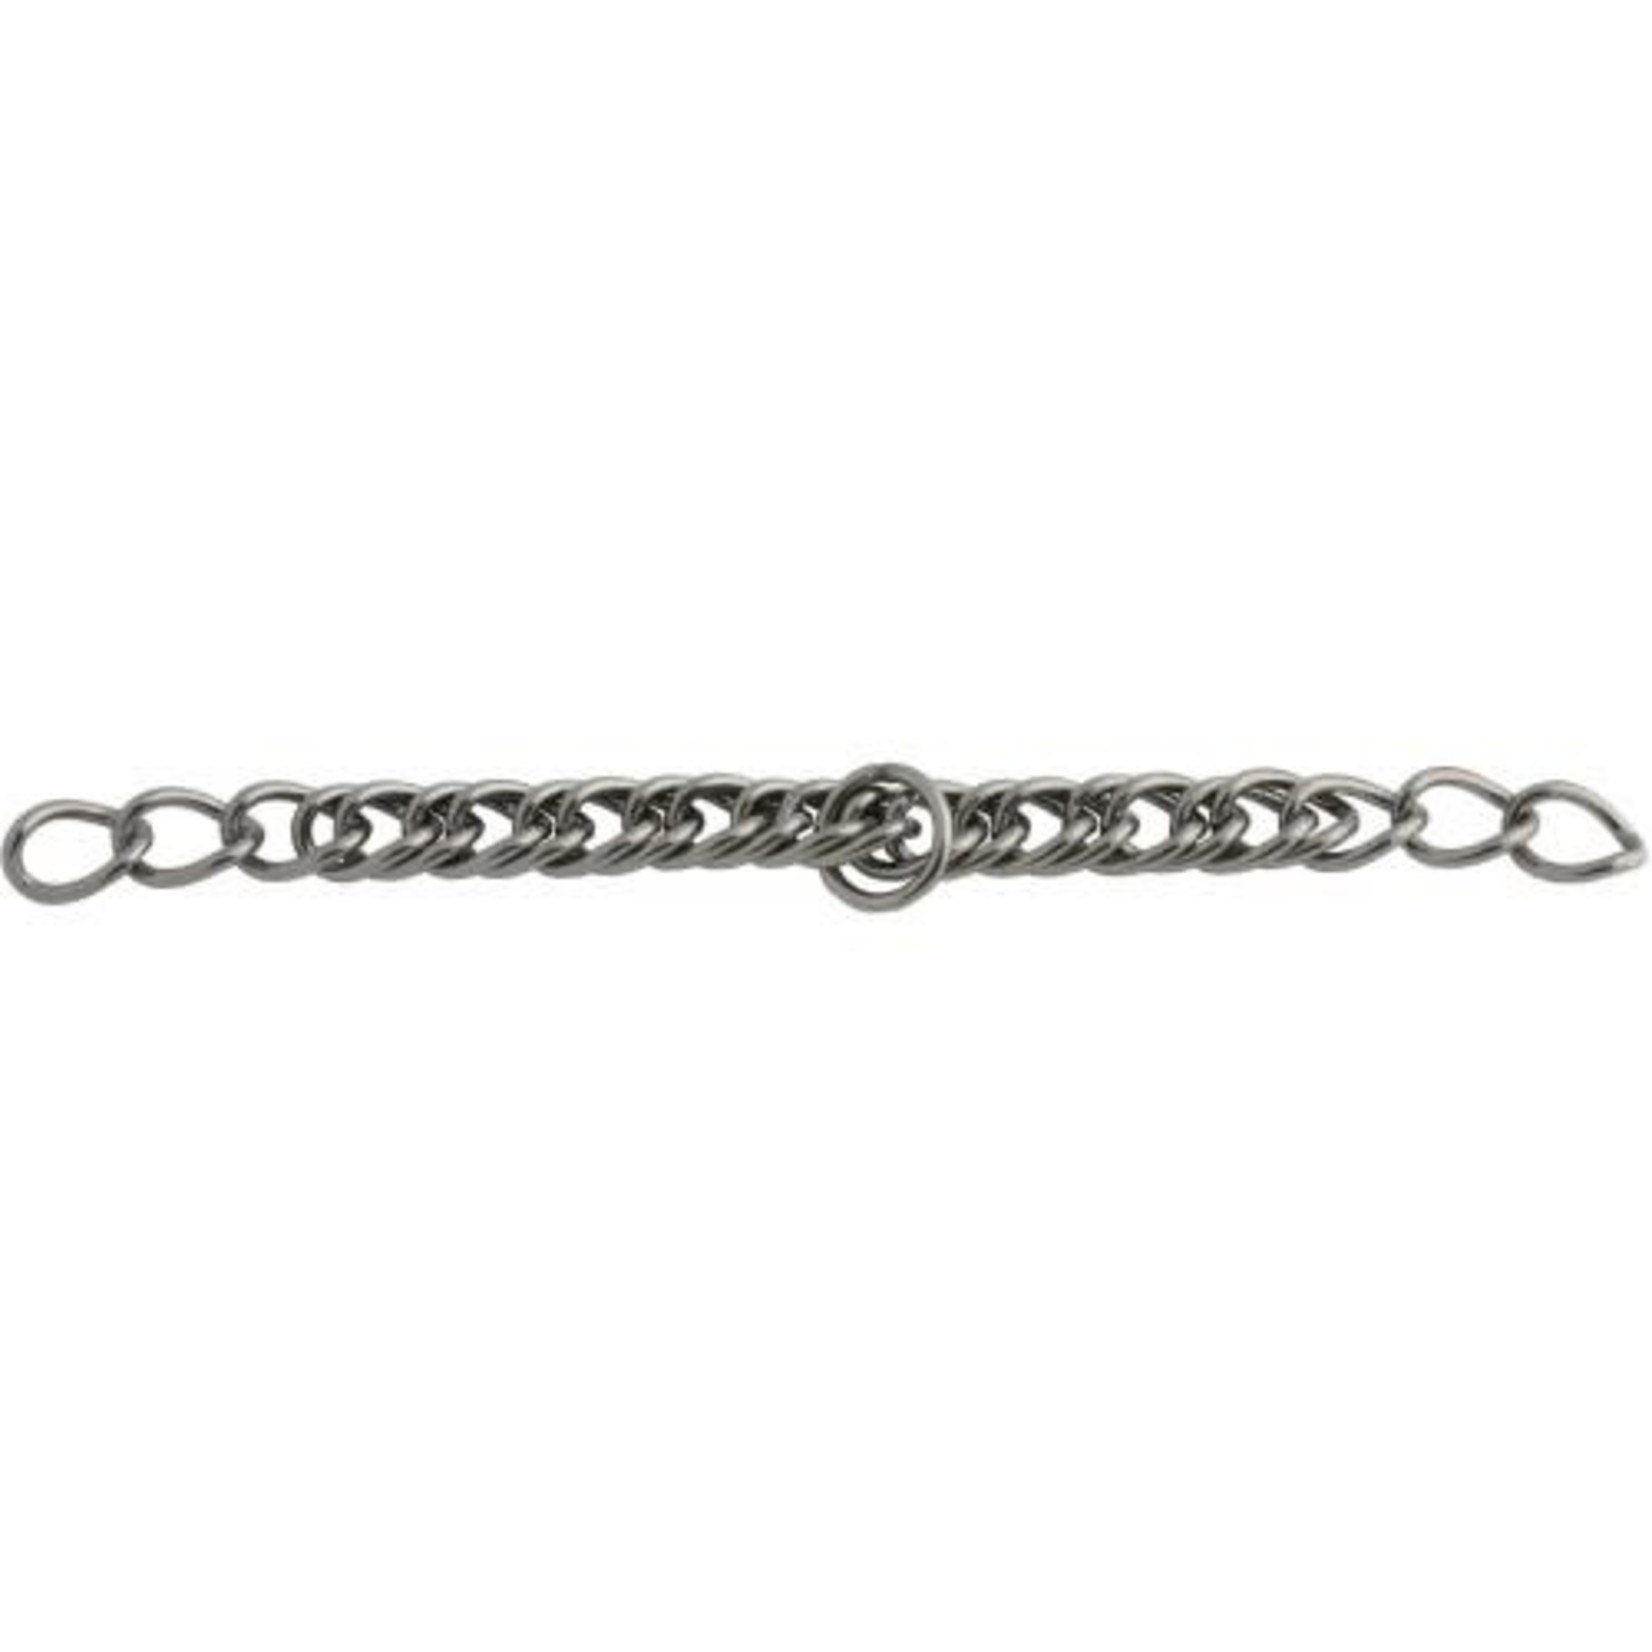 Western Rawhide Stainless Steel English Curb Chain